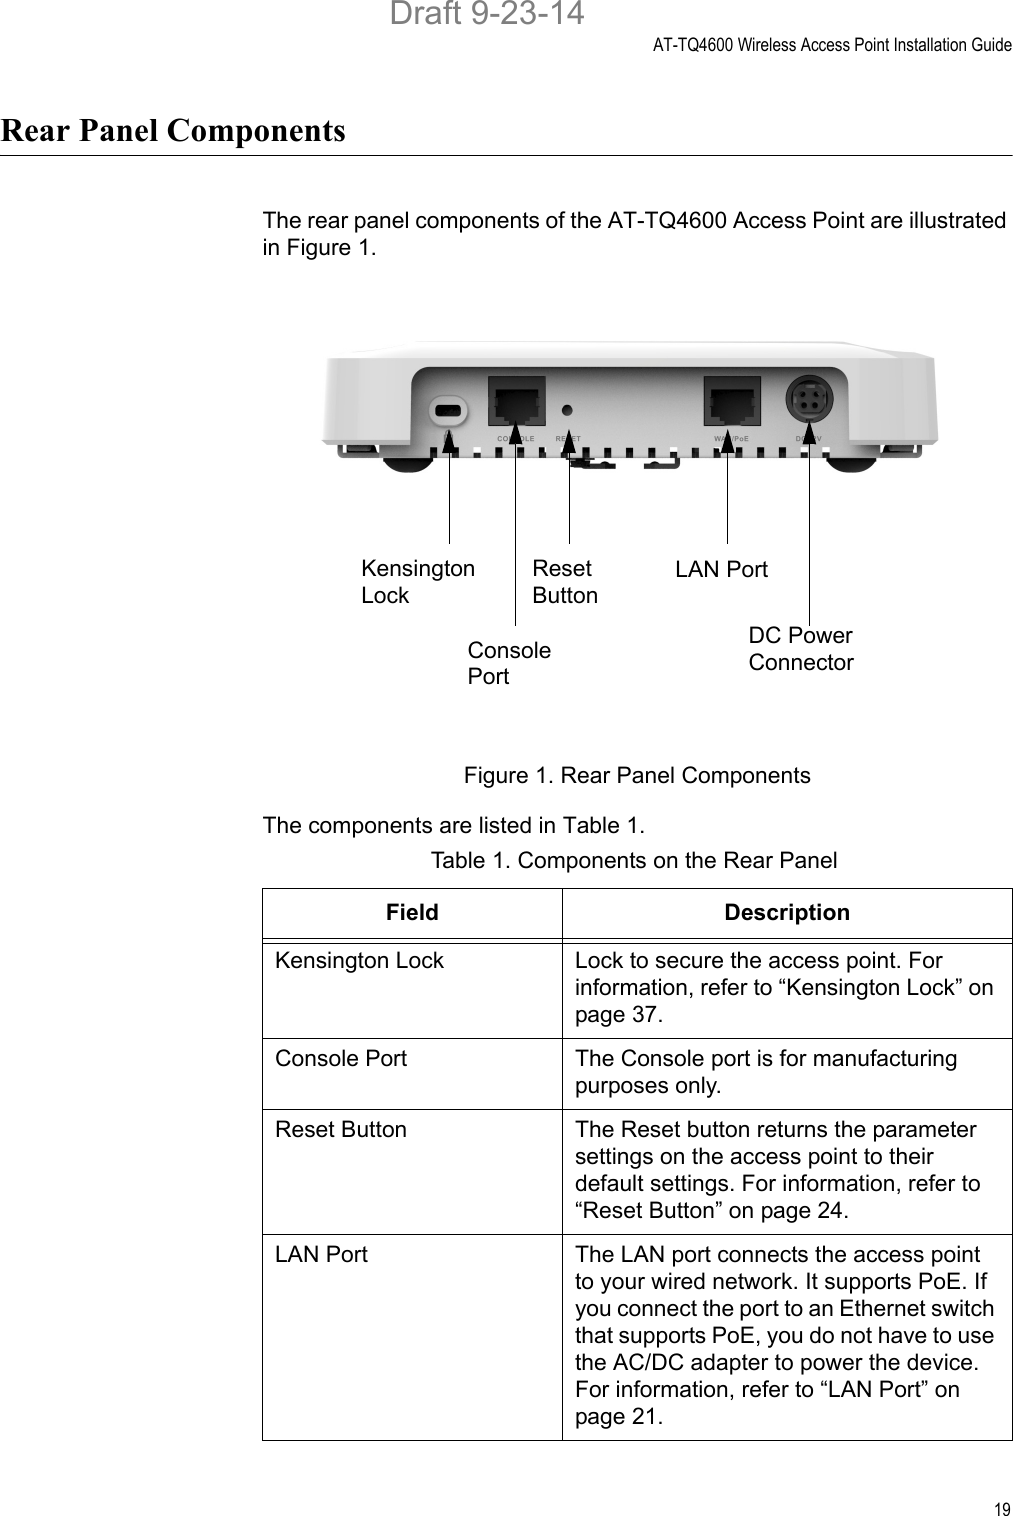 AT-TQ4600 Wireless Access Point Installation Guide19Rear Panel ComponentsThe rear panel components of the AT-TQ4600 Access Point are illustrated in Figure 1.Figure 1. Rear Panel ComponentsThe components are listed in Table 1.Table 1. Components on the Rear PanelField DescriptionKensington Lock Lock to secure the access point. For information, refer to “Kensington Lock” on page 37.Console Port The Console port is for manufacturing purposes only.Reset Button The Reset button returns the parameter settings on the access point to their default settings. For information, refer to “Reset Button” on page 24.LAN Port The LAN port connects the access point to your wired network. It supports PoE. If you connect the port to an Ethernet switch that supports PoE, you do not have to use the AC/DC adapter to power the device. For information, refer to “LAN Port” on page 21.Reset ButtonConsole PortKensington LockDC Power ConnectorLAN PortDraft 9-23-14